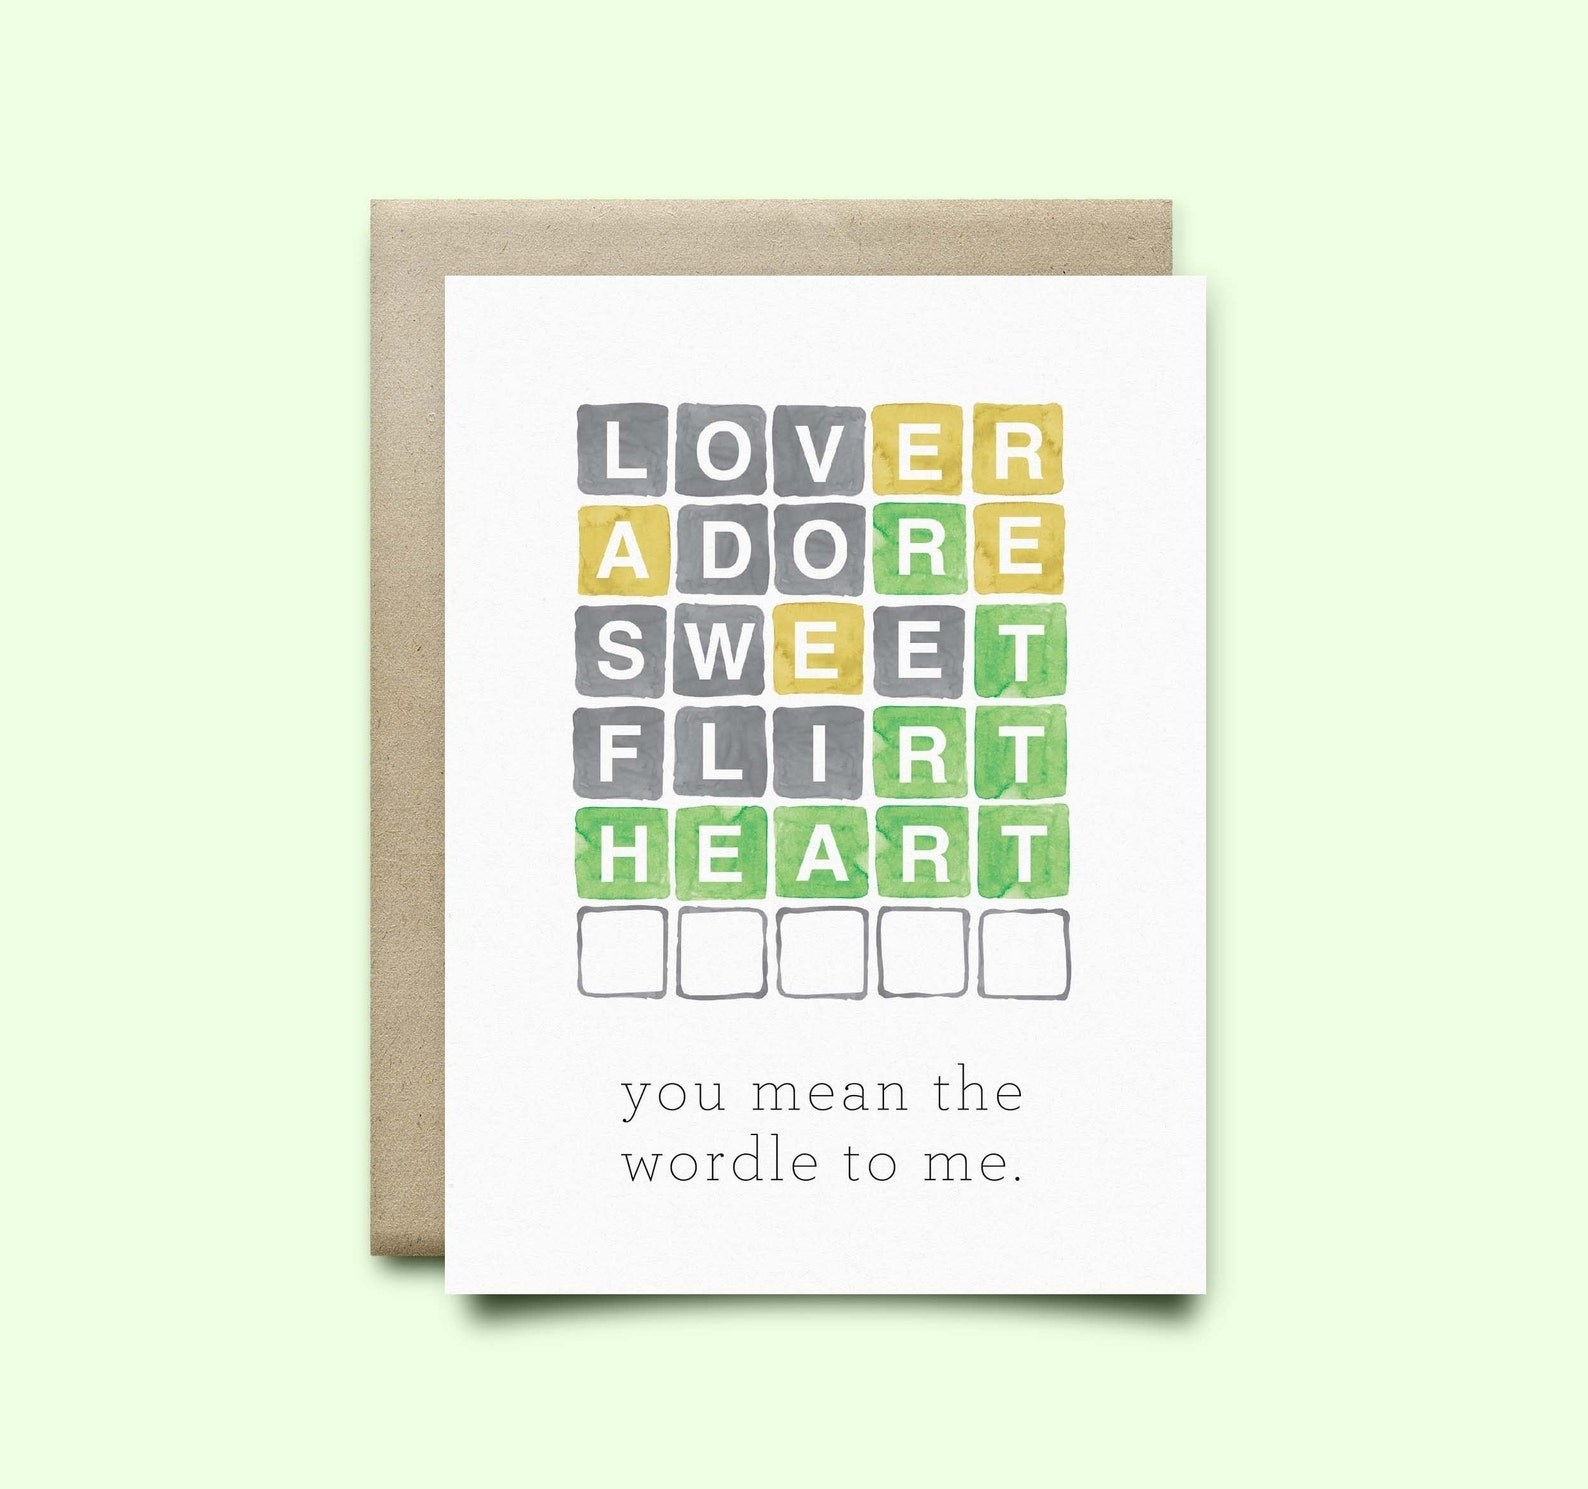 greeting card with the words &quot;lover, adore, sweet, flirt, heart&quot; on it as well as &quot;you mean the wordle to me&quot;